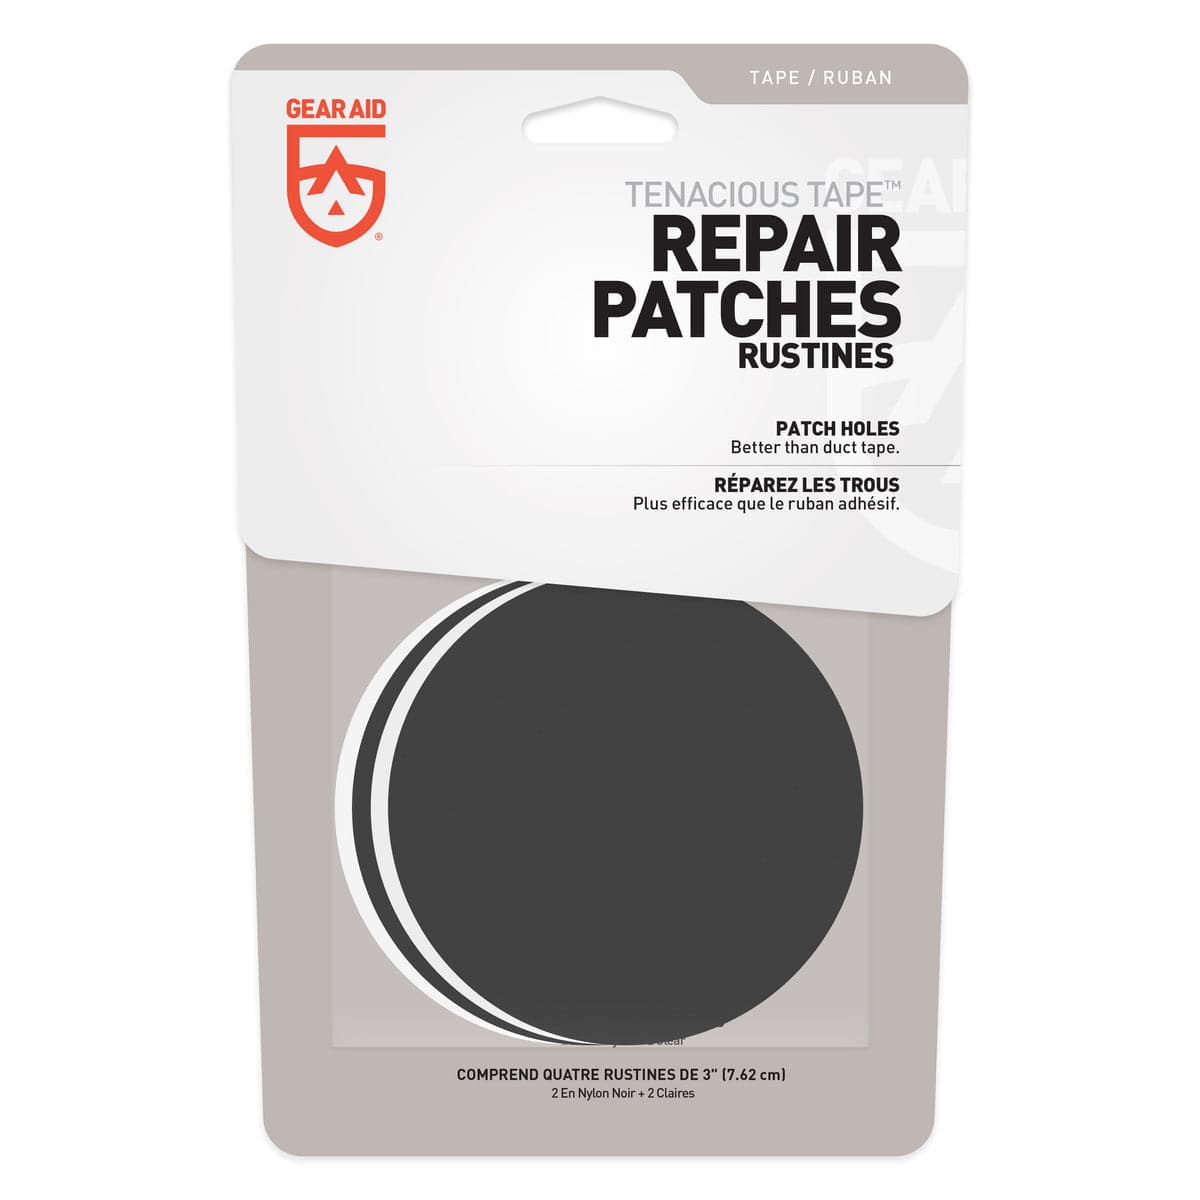 Featuring the Tenacious Tape Patches fabric repair, field repair, kayak care, kayak repair manufactured by Gear Aid shown here from a second angle.